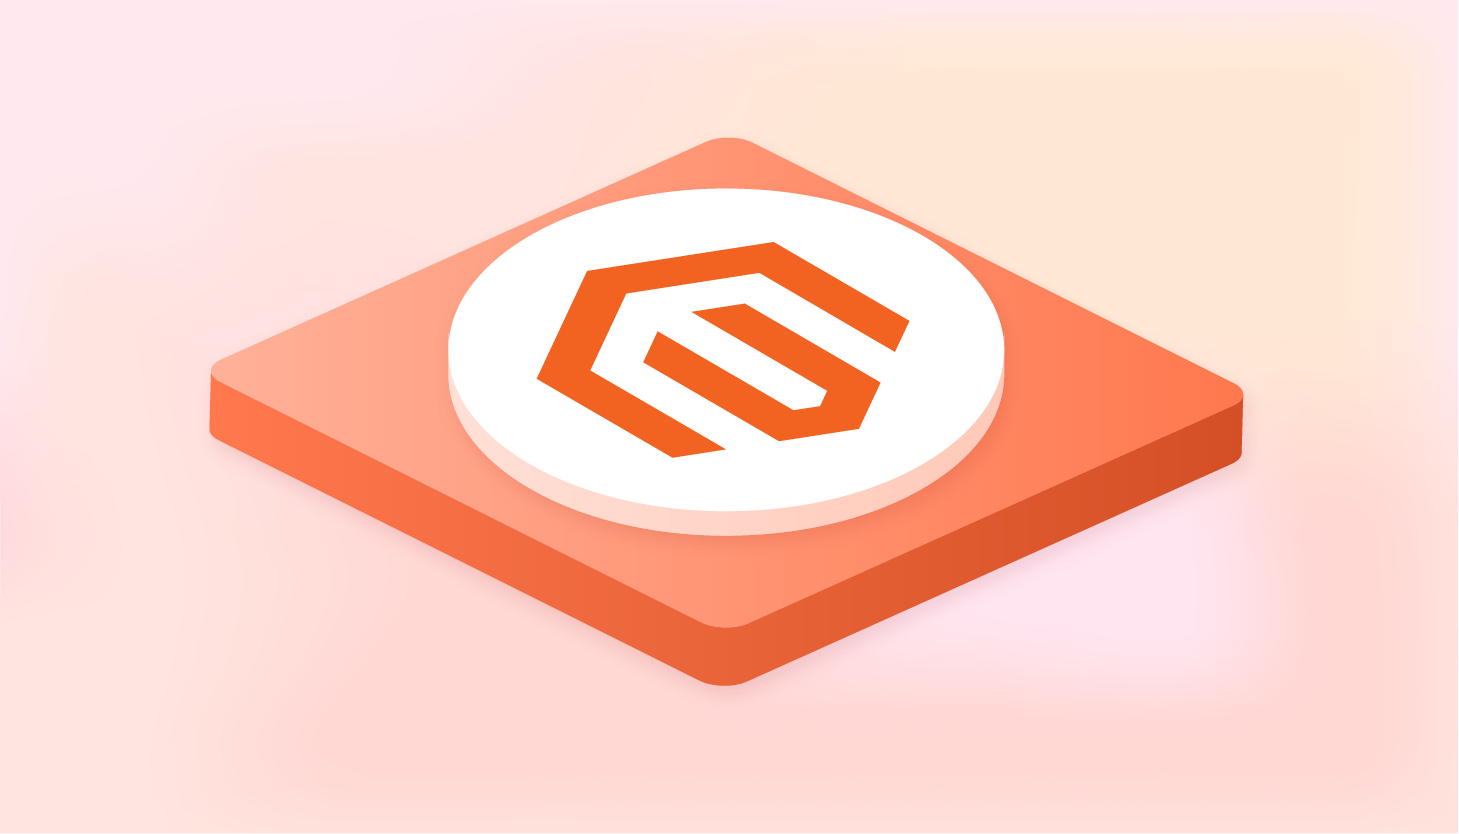 Why Use Magento Ecommerce for Your Online Store?